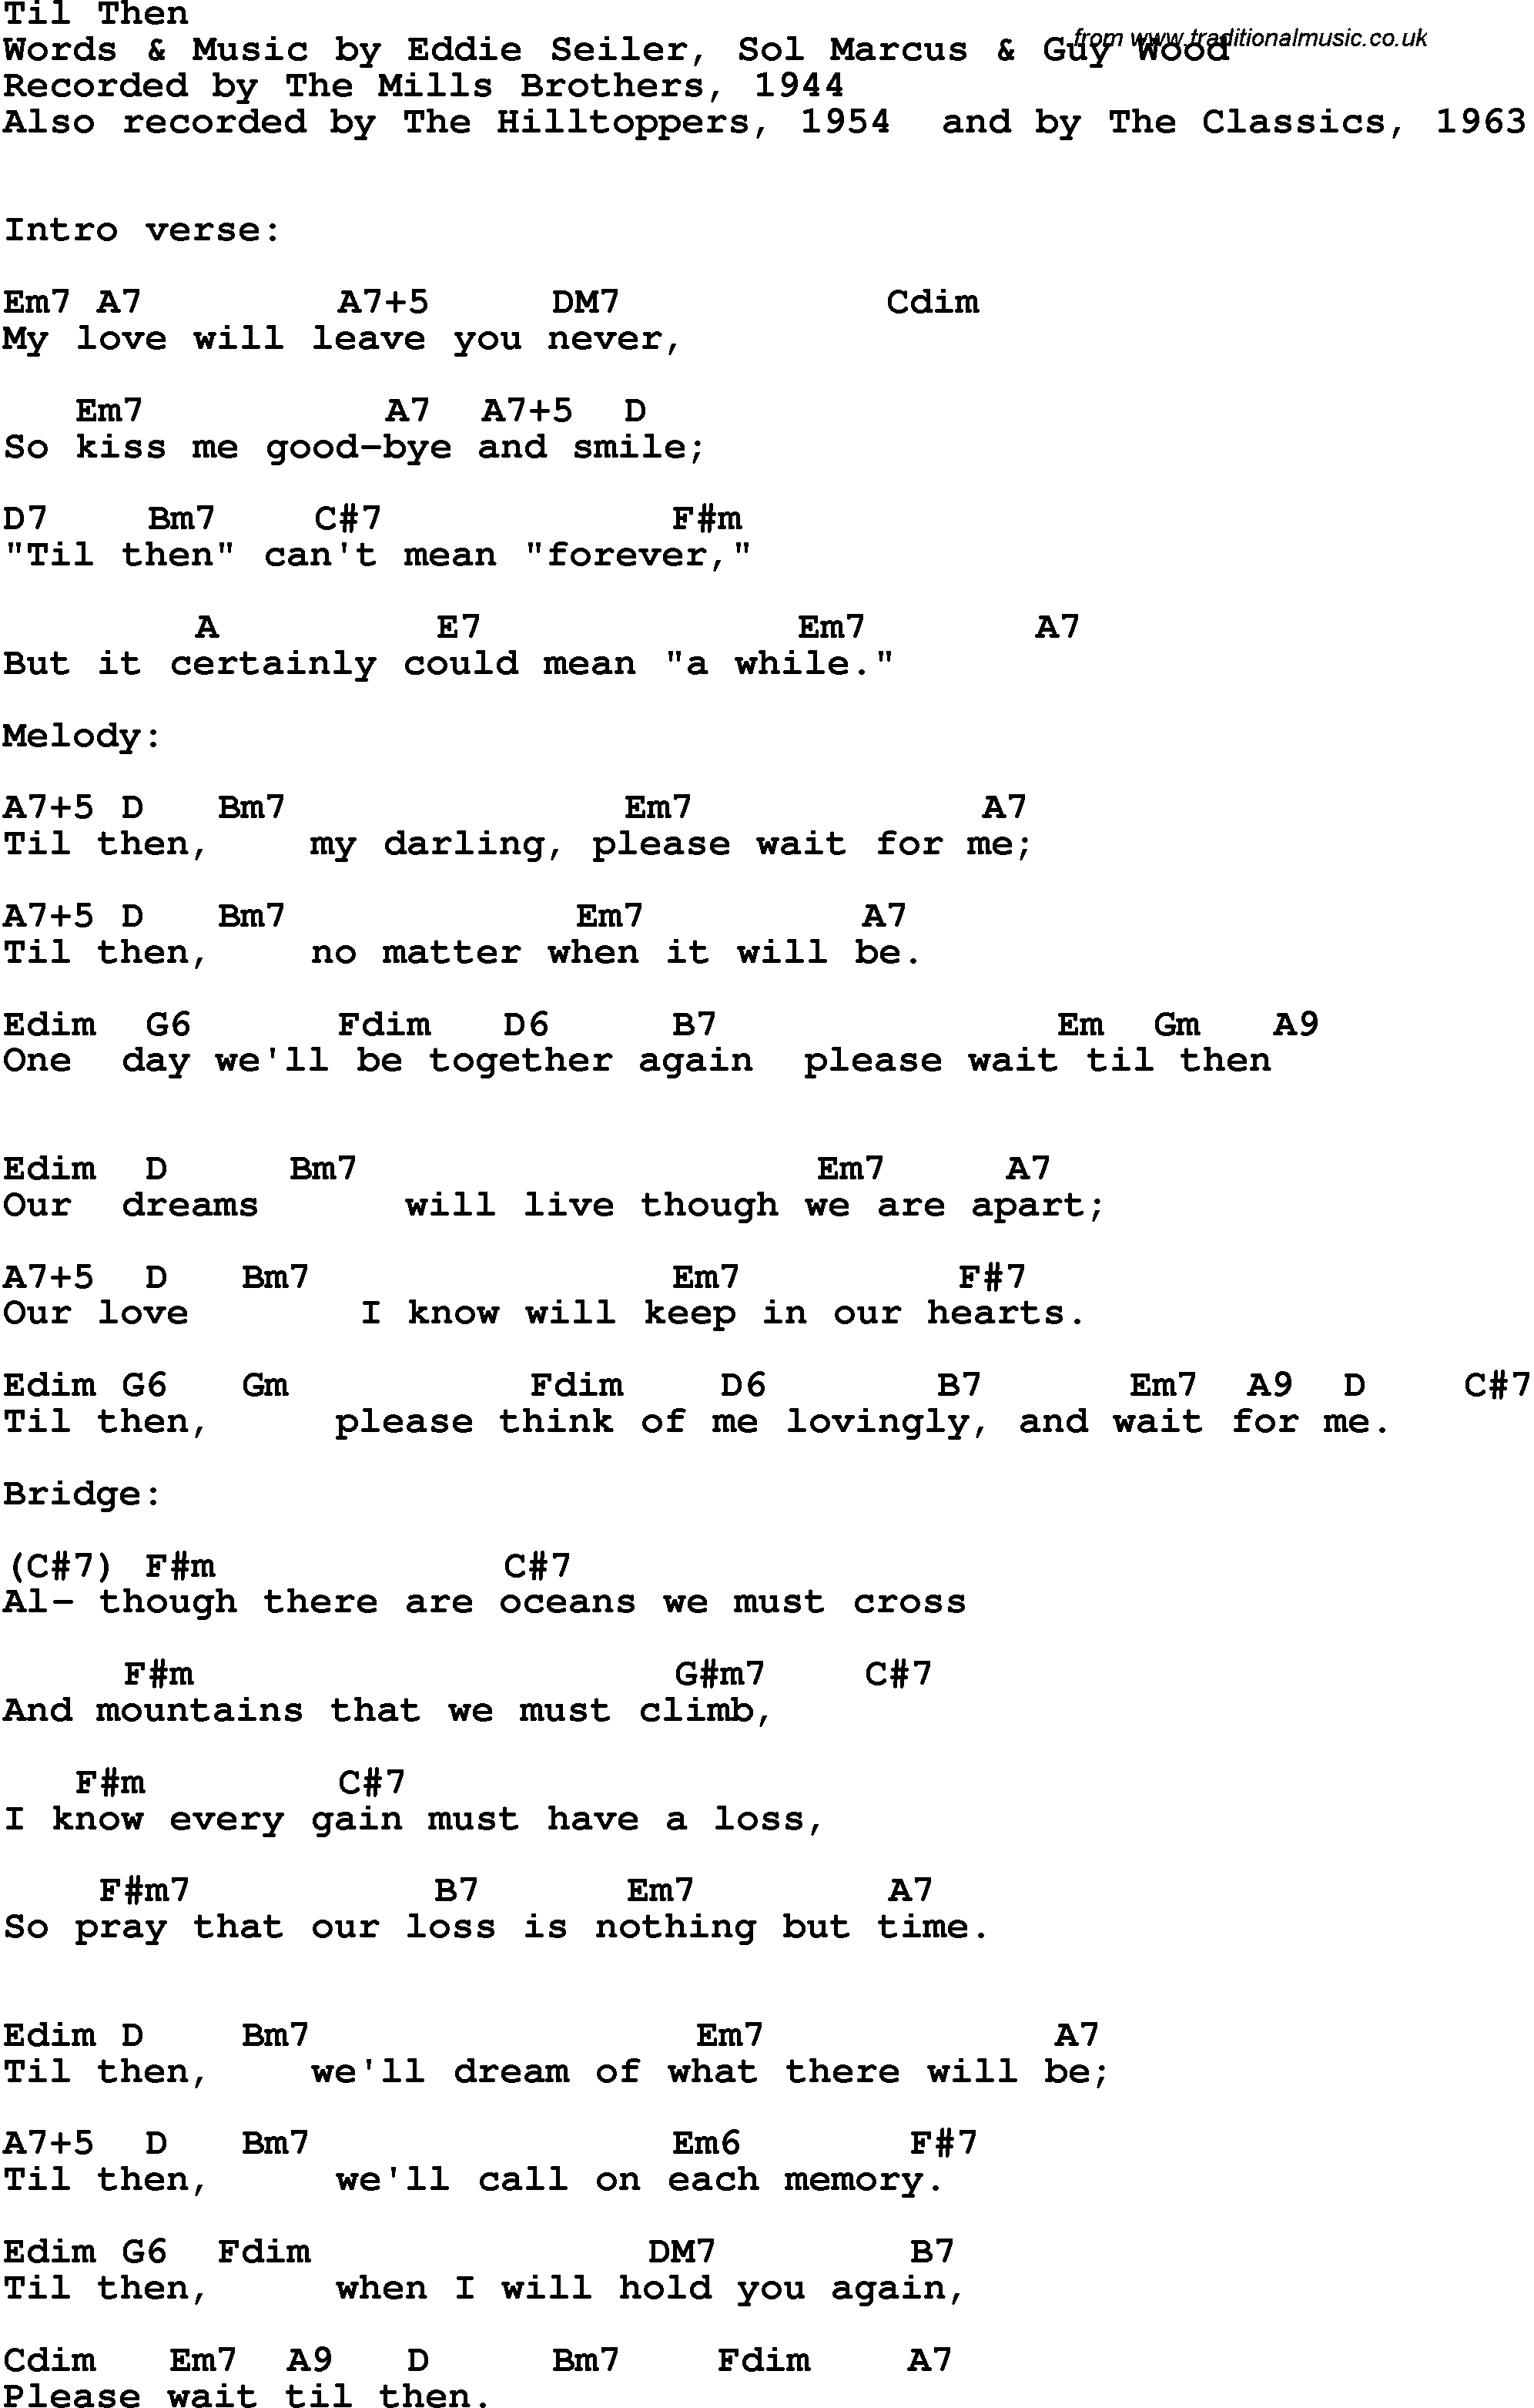 Song Lyrics with guitar chords for Til Then - The Mills Brothers, 1944